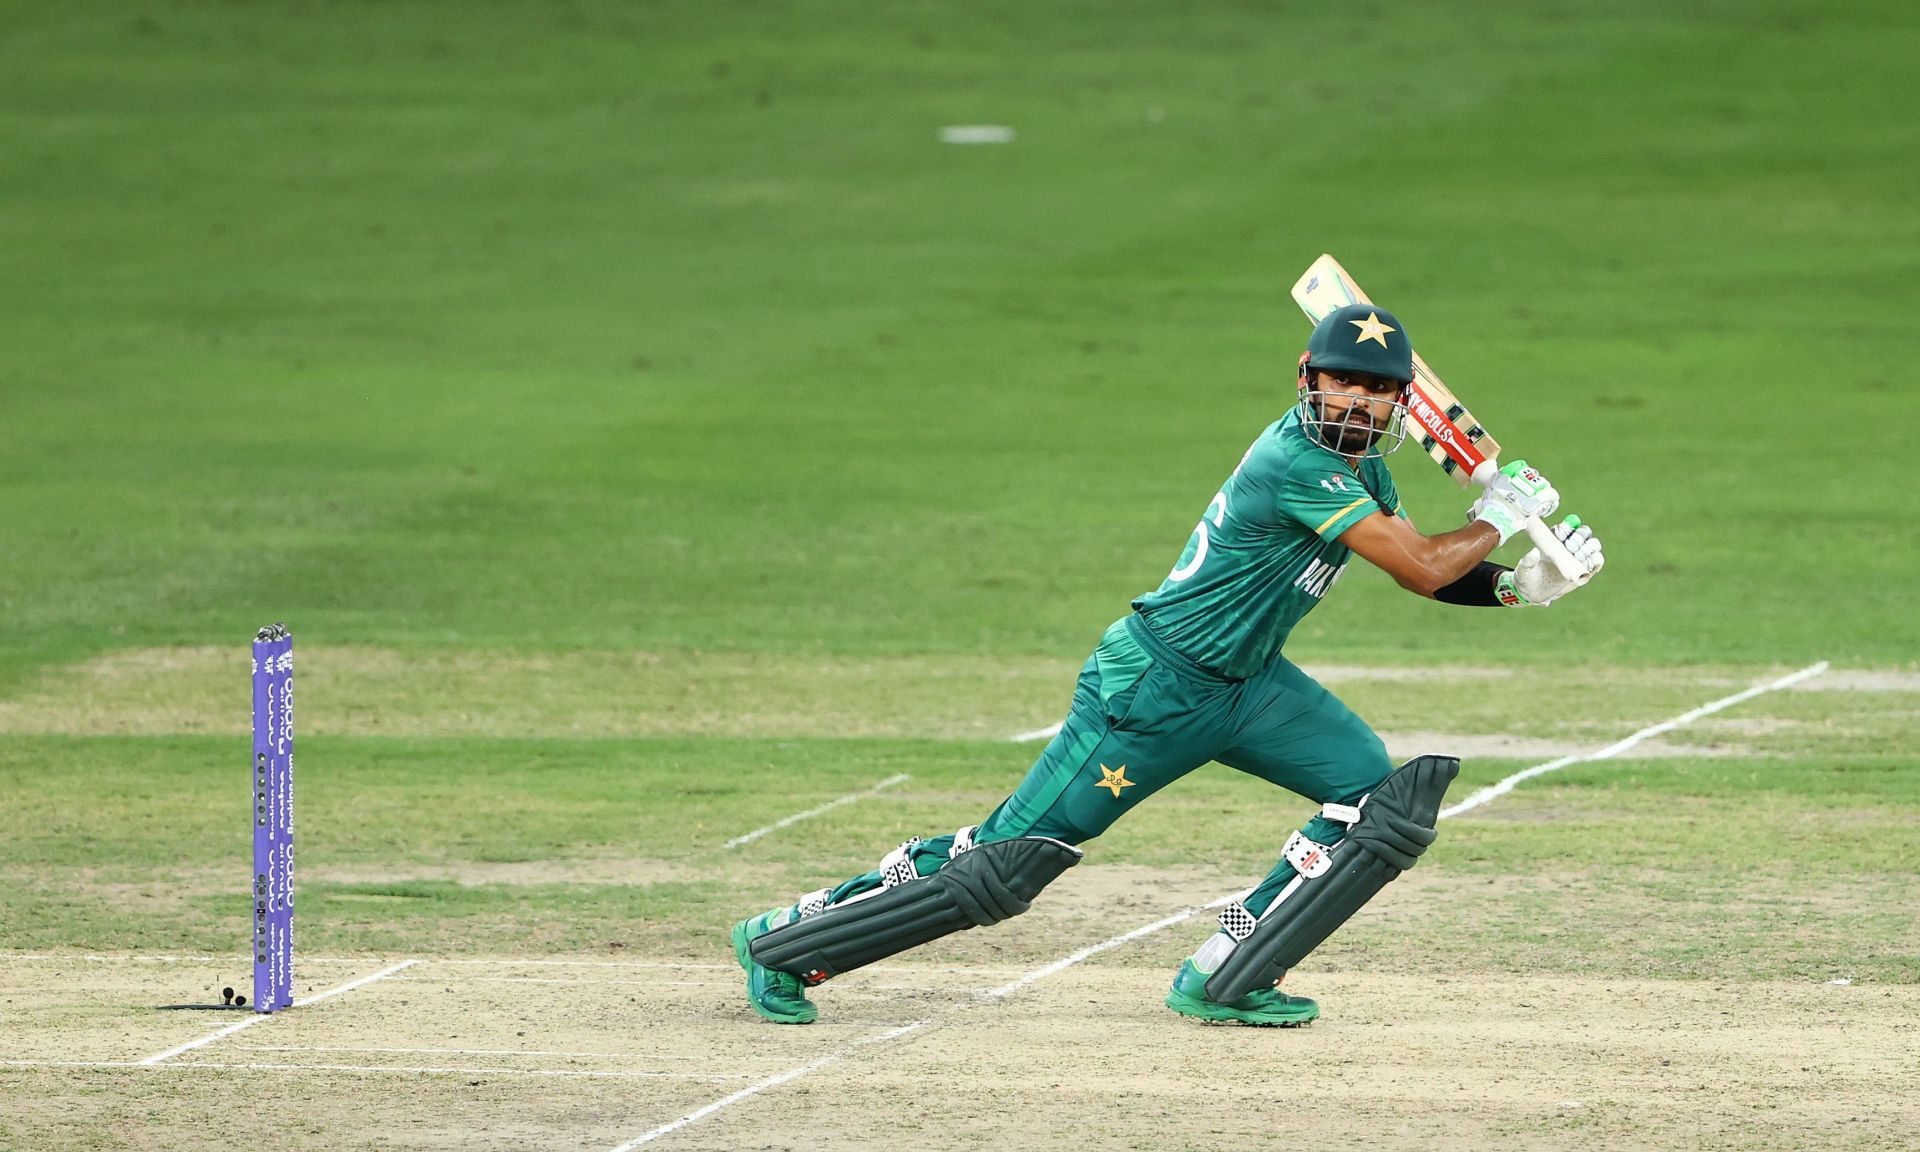 Azam is yet to play a big knock for Pakistan in Asia Cup 2022 (Image: Getty)